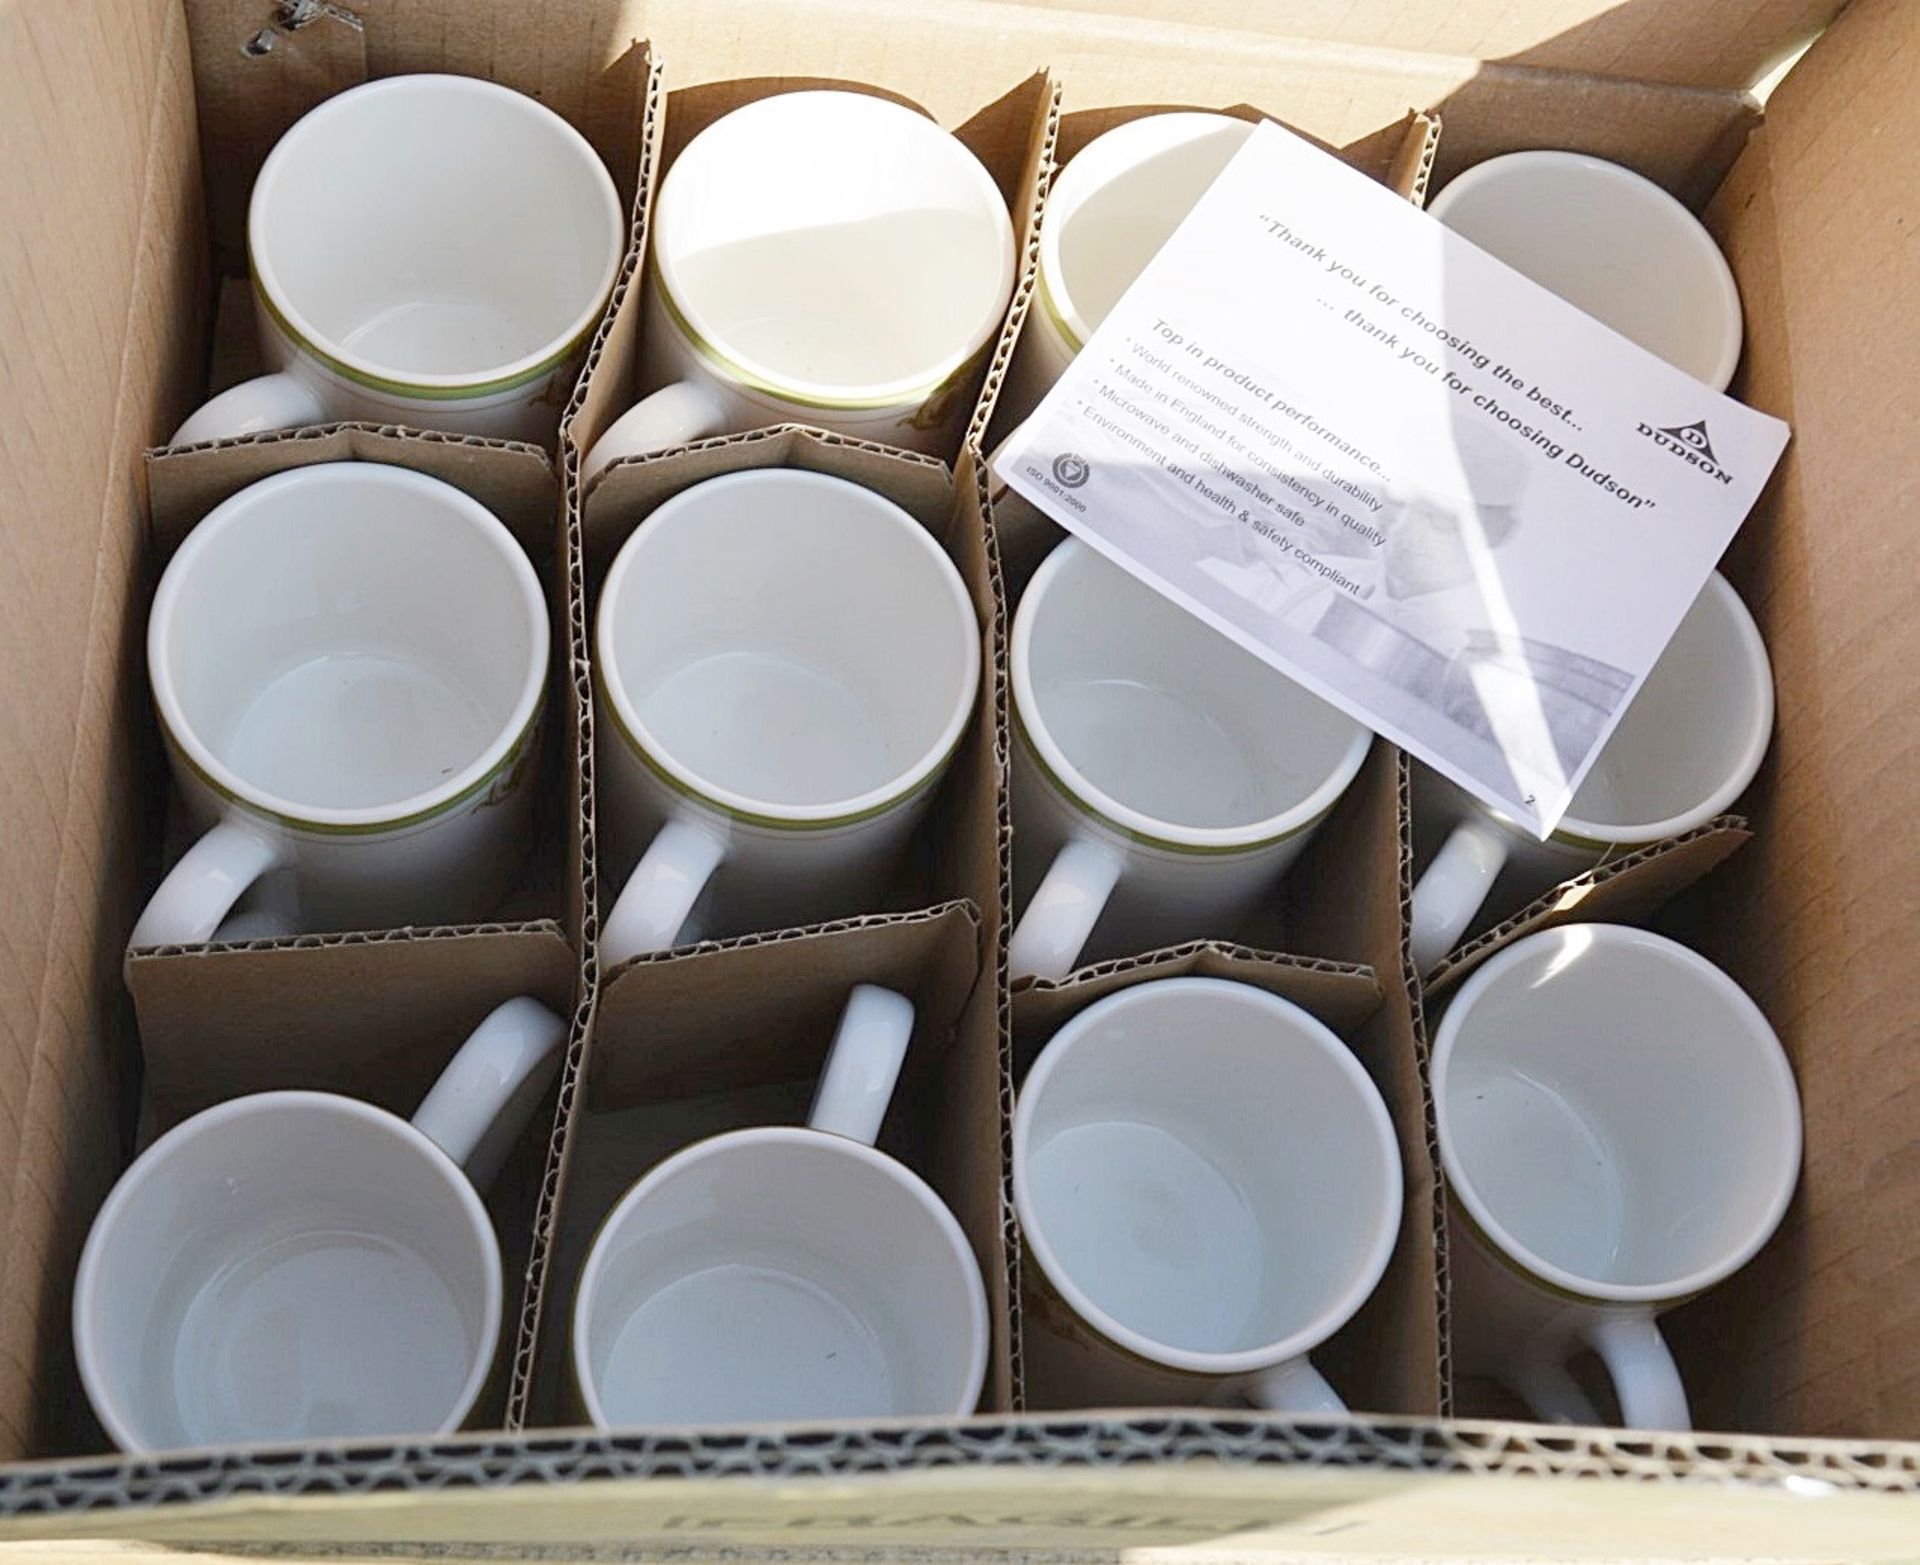 18 x DUDSON Fine China 'Georgian' Espresso Cups with 'Famous Branding' - NEW - Image 2 of 6